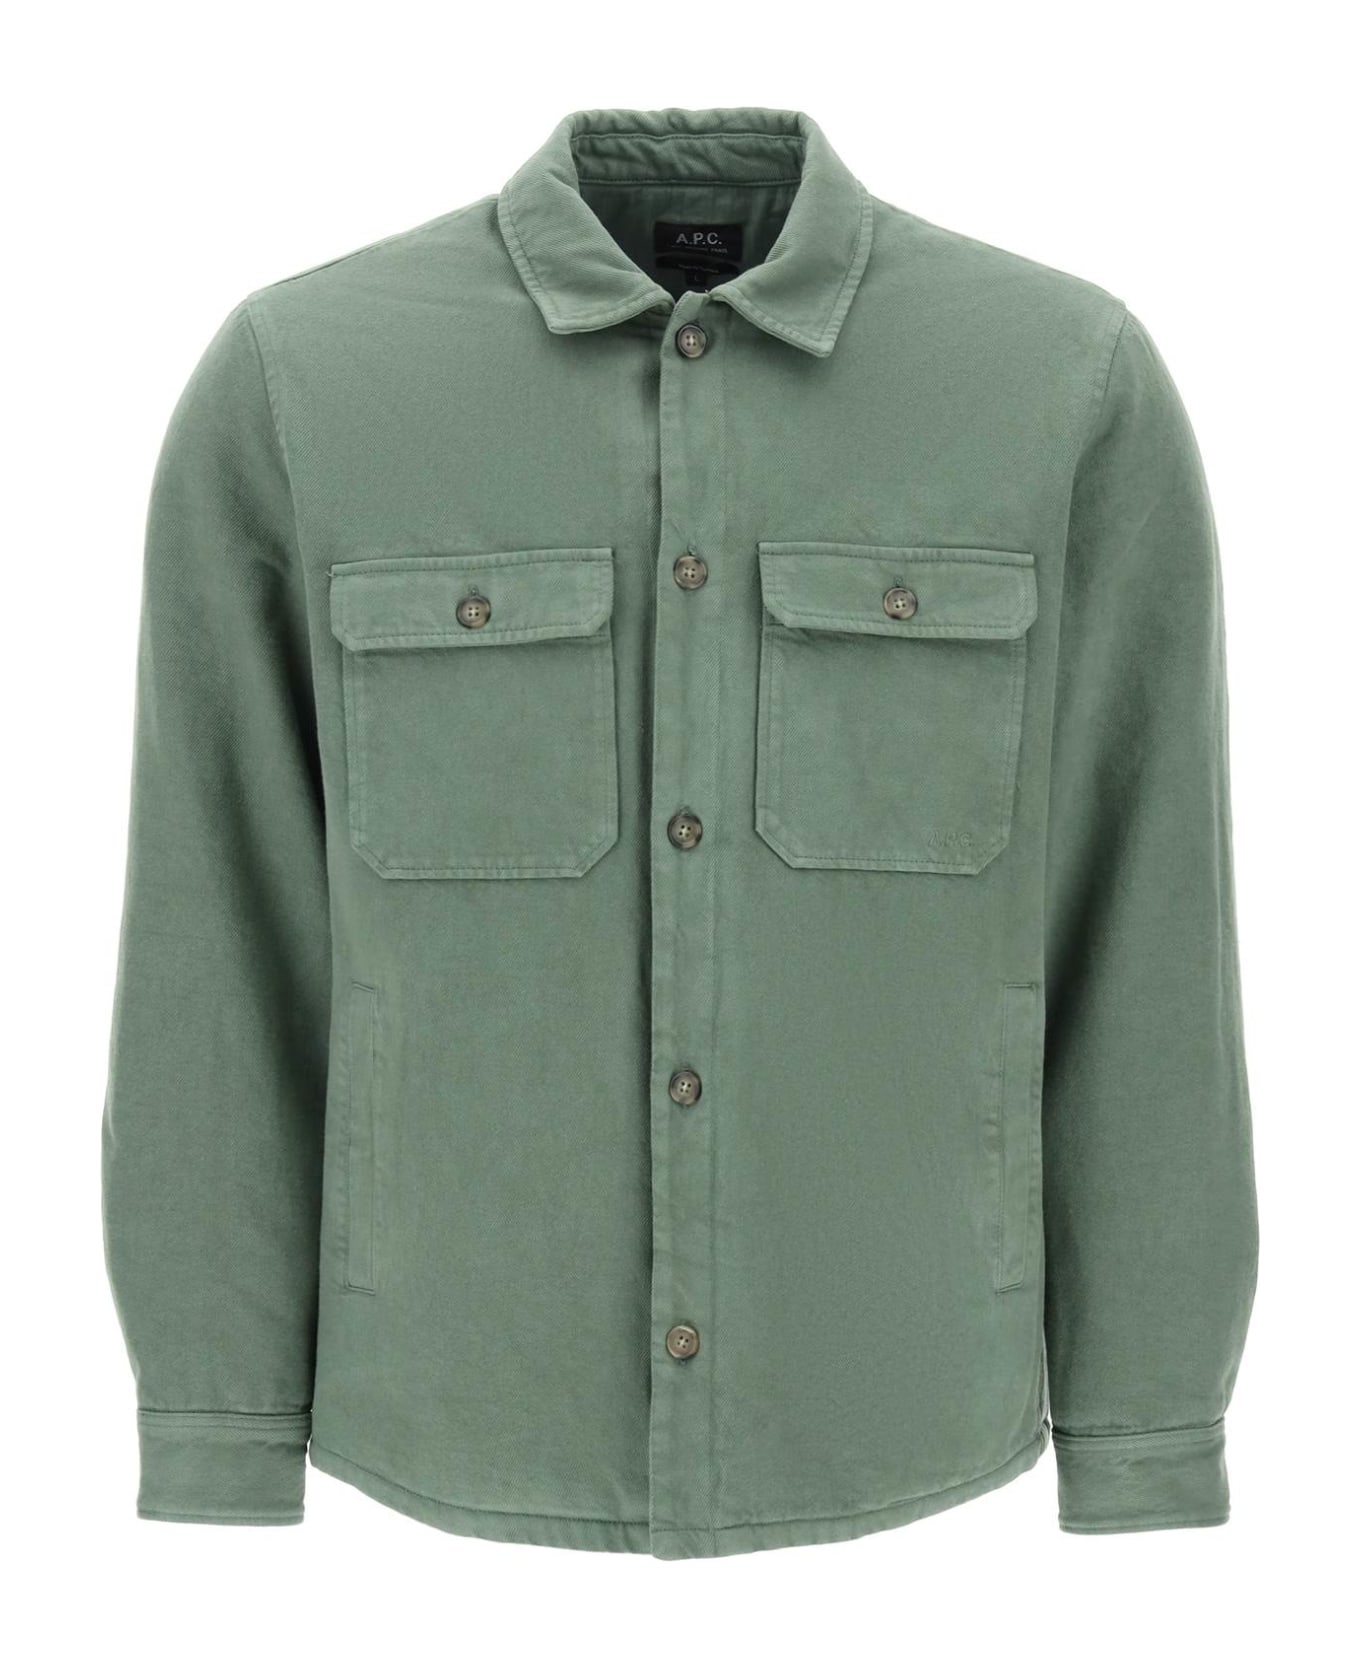 A.P.C. Alessio Padded Overshirt - FORET (Green)